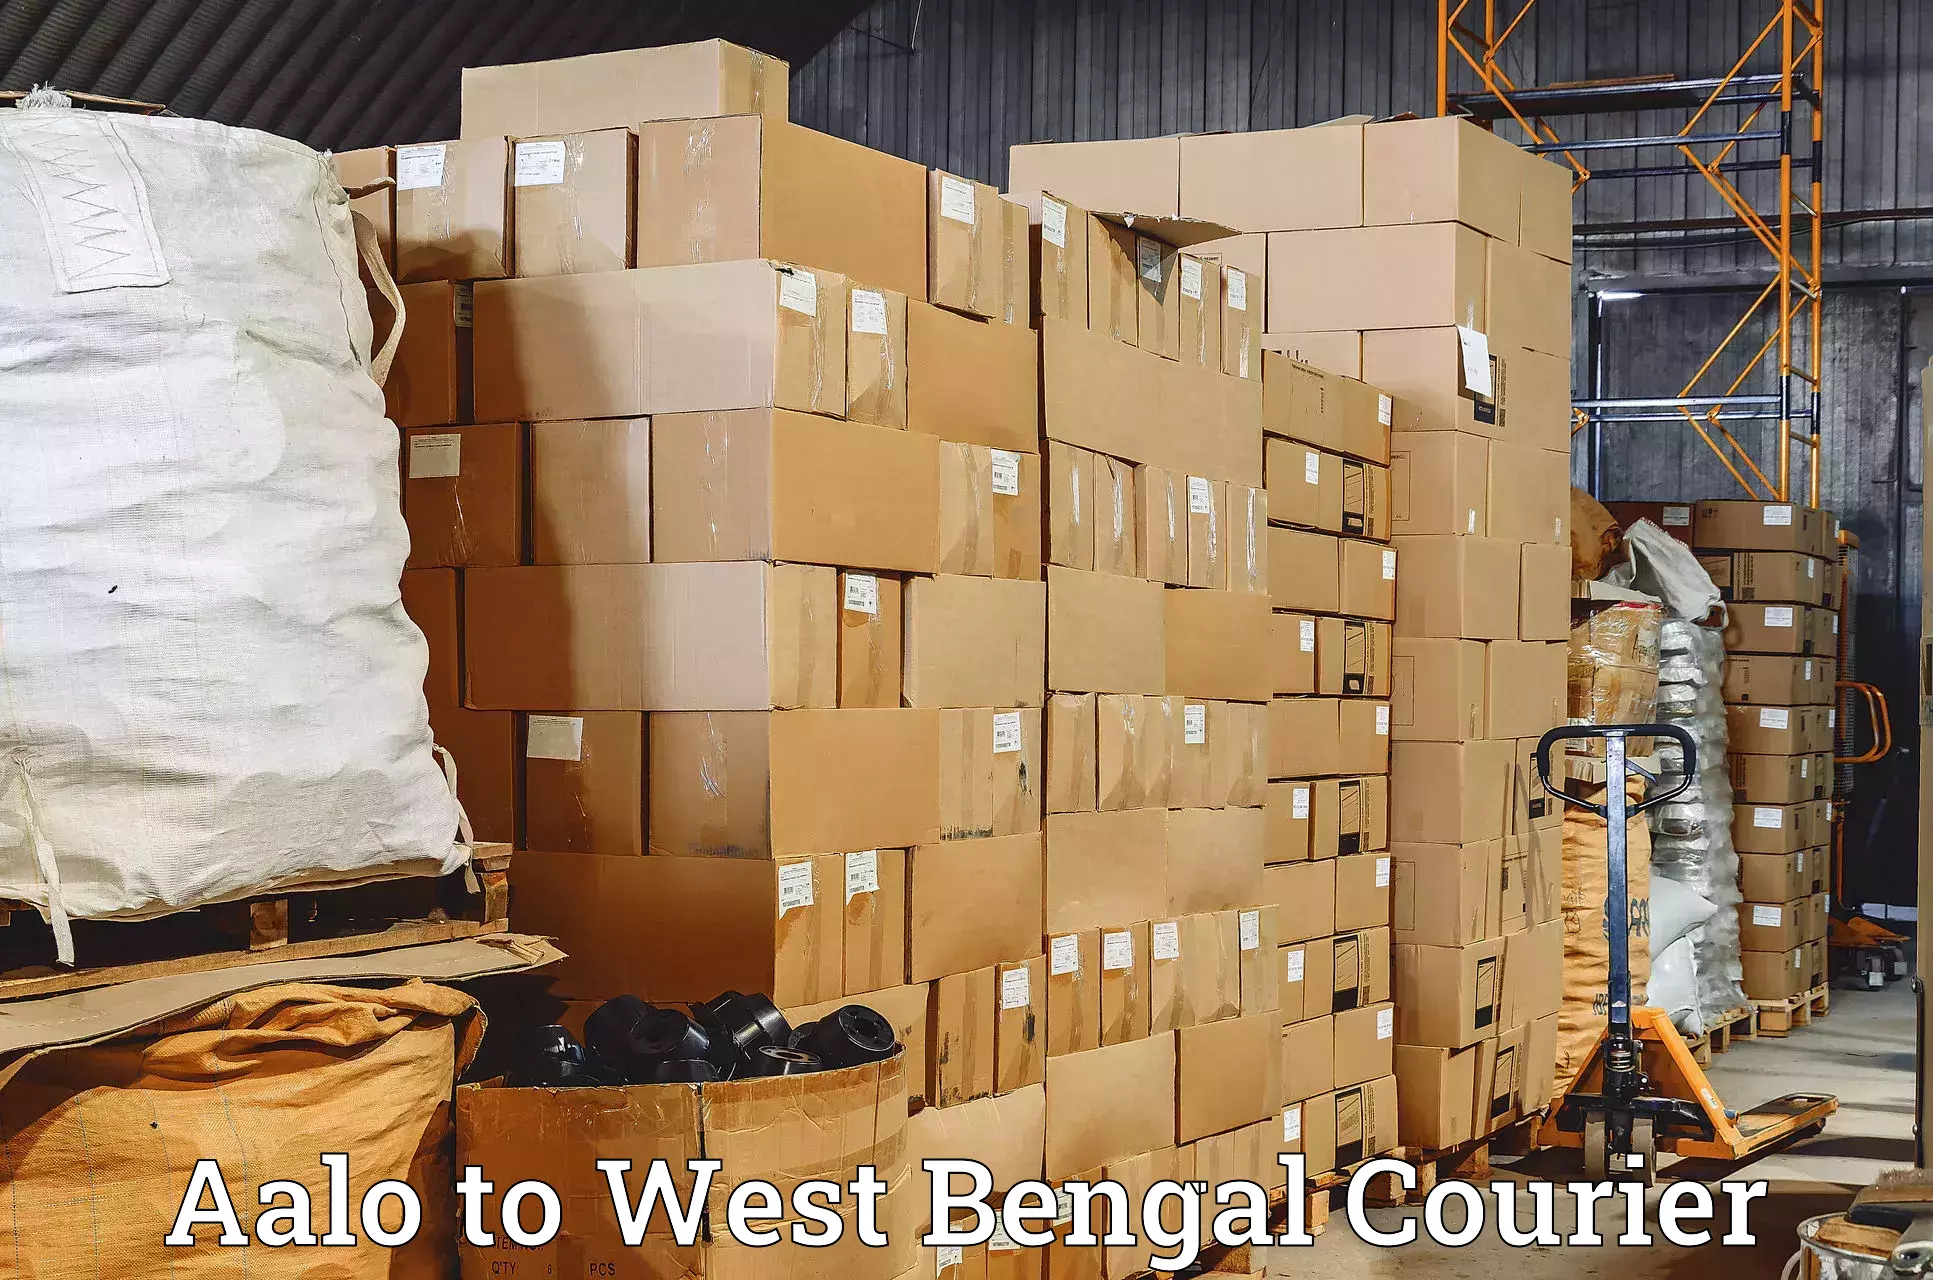 Courier service comparison Aalo to West Bengal